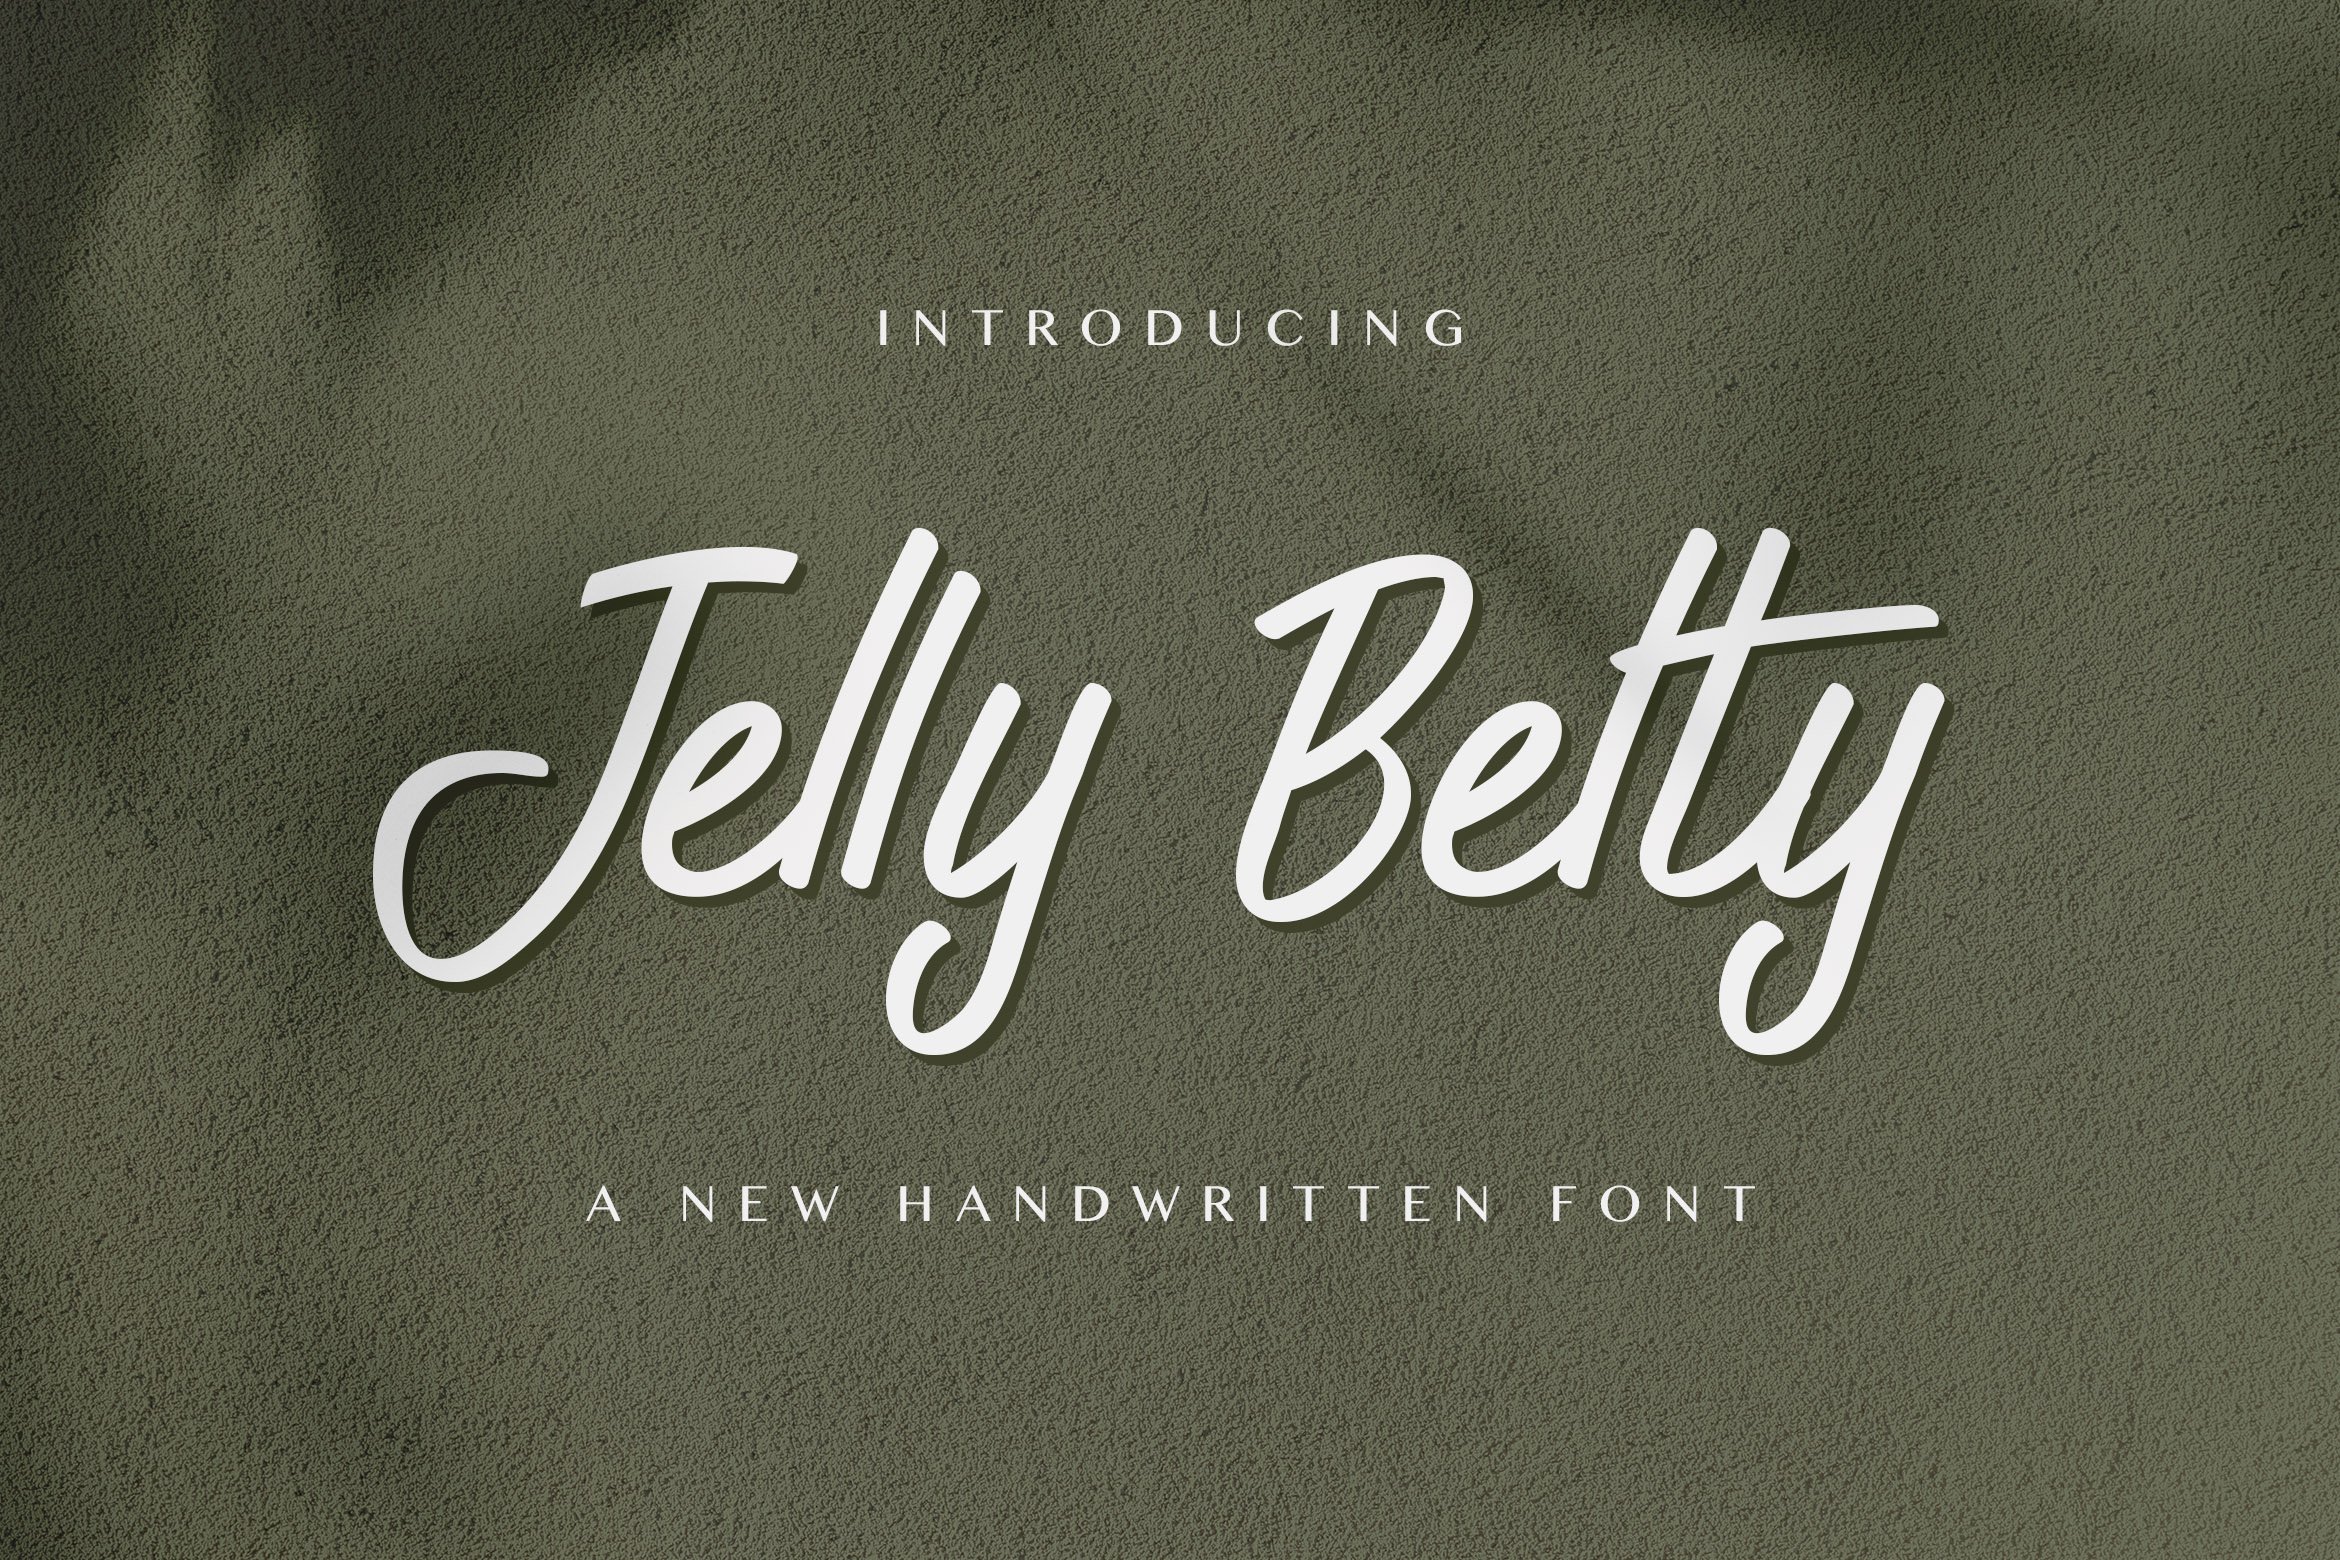 Jelly Belty! - Handwritten Font cover image.